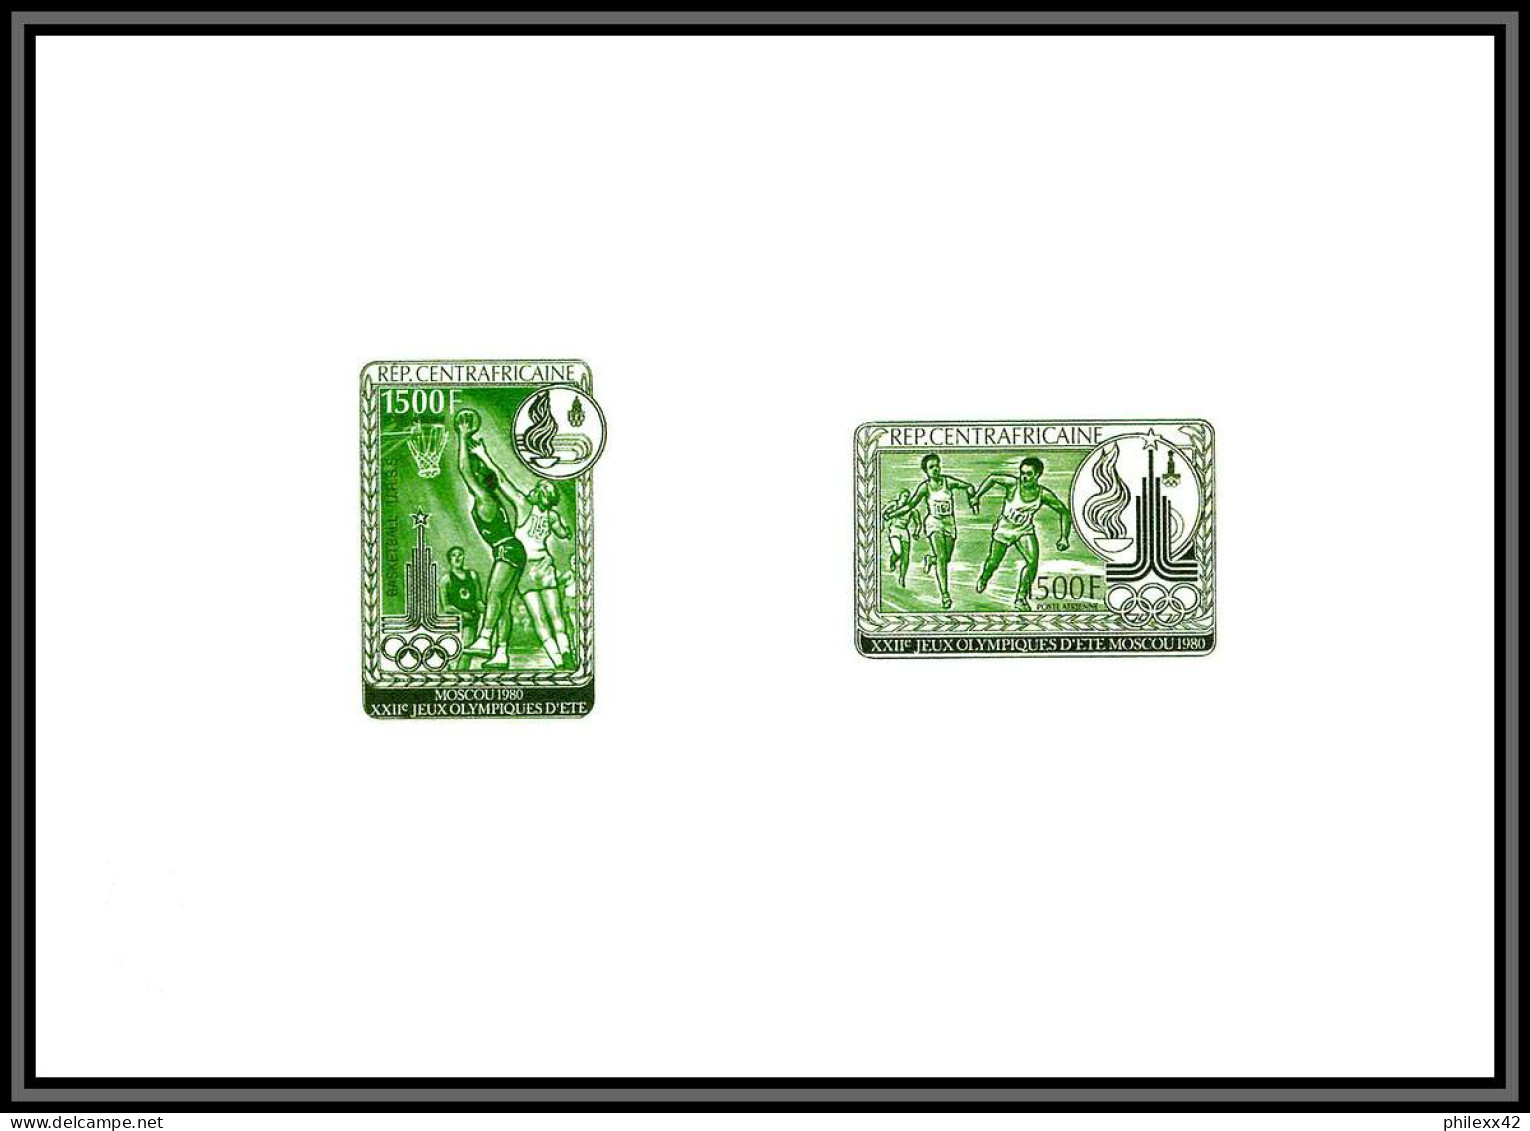 96172 N°89/686 Basket Moscou 1980 Jeux Olympiques Olympic Games Centrafricaine Epreuve Collective Artist Proof Green - Summer 1980: Moscow